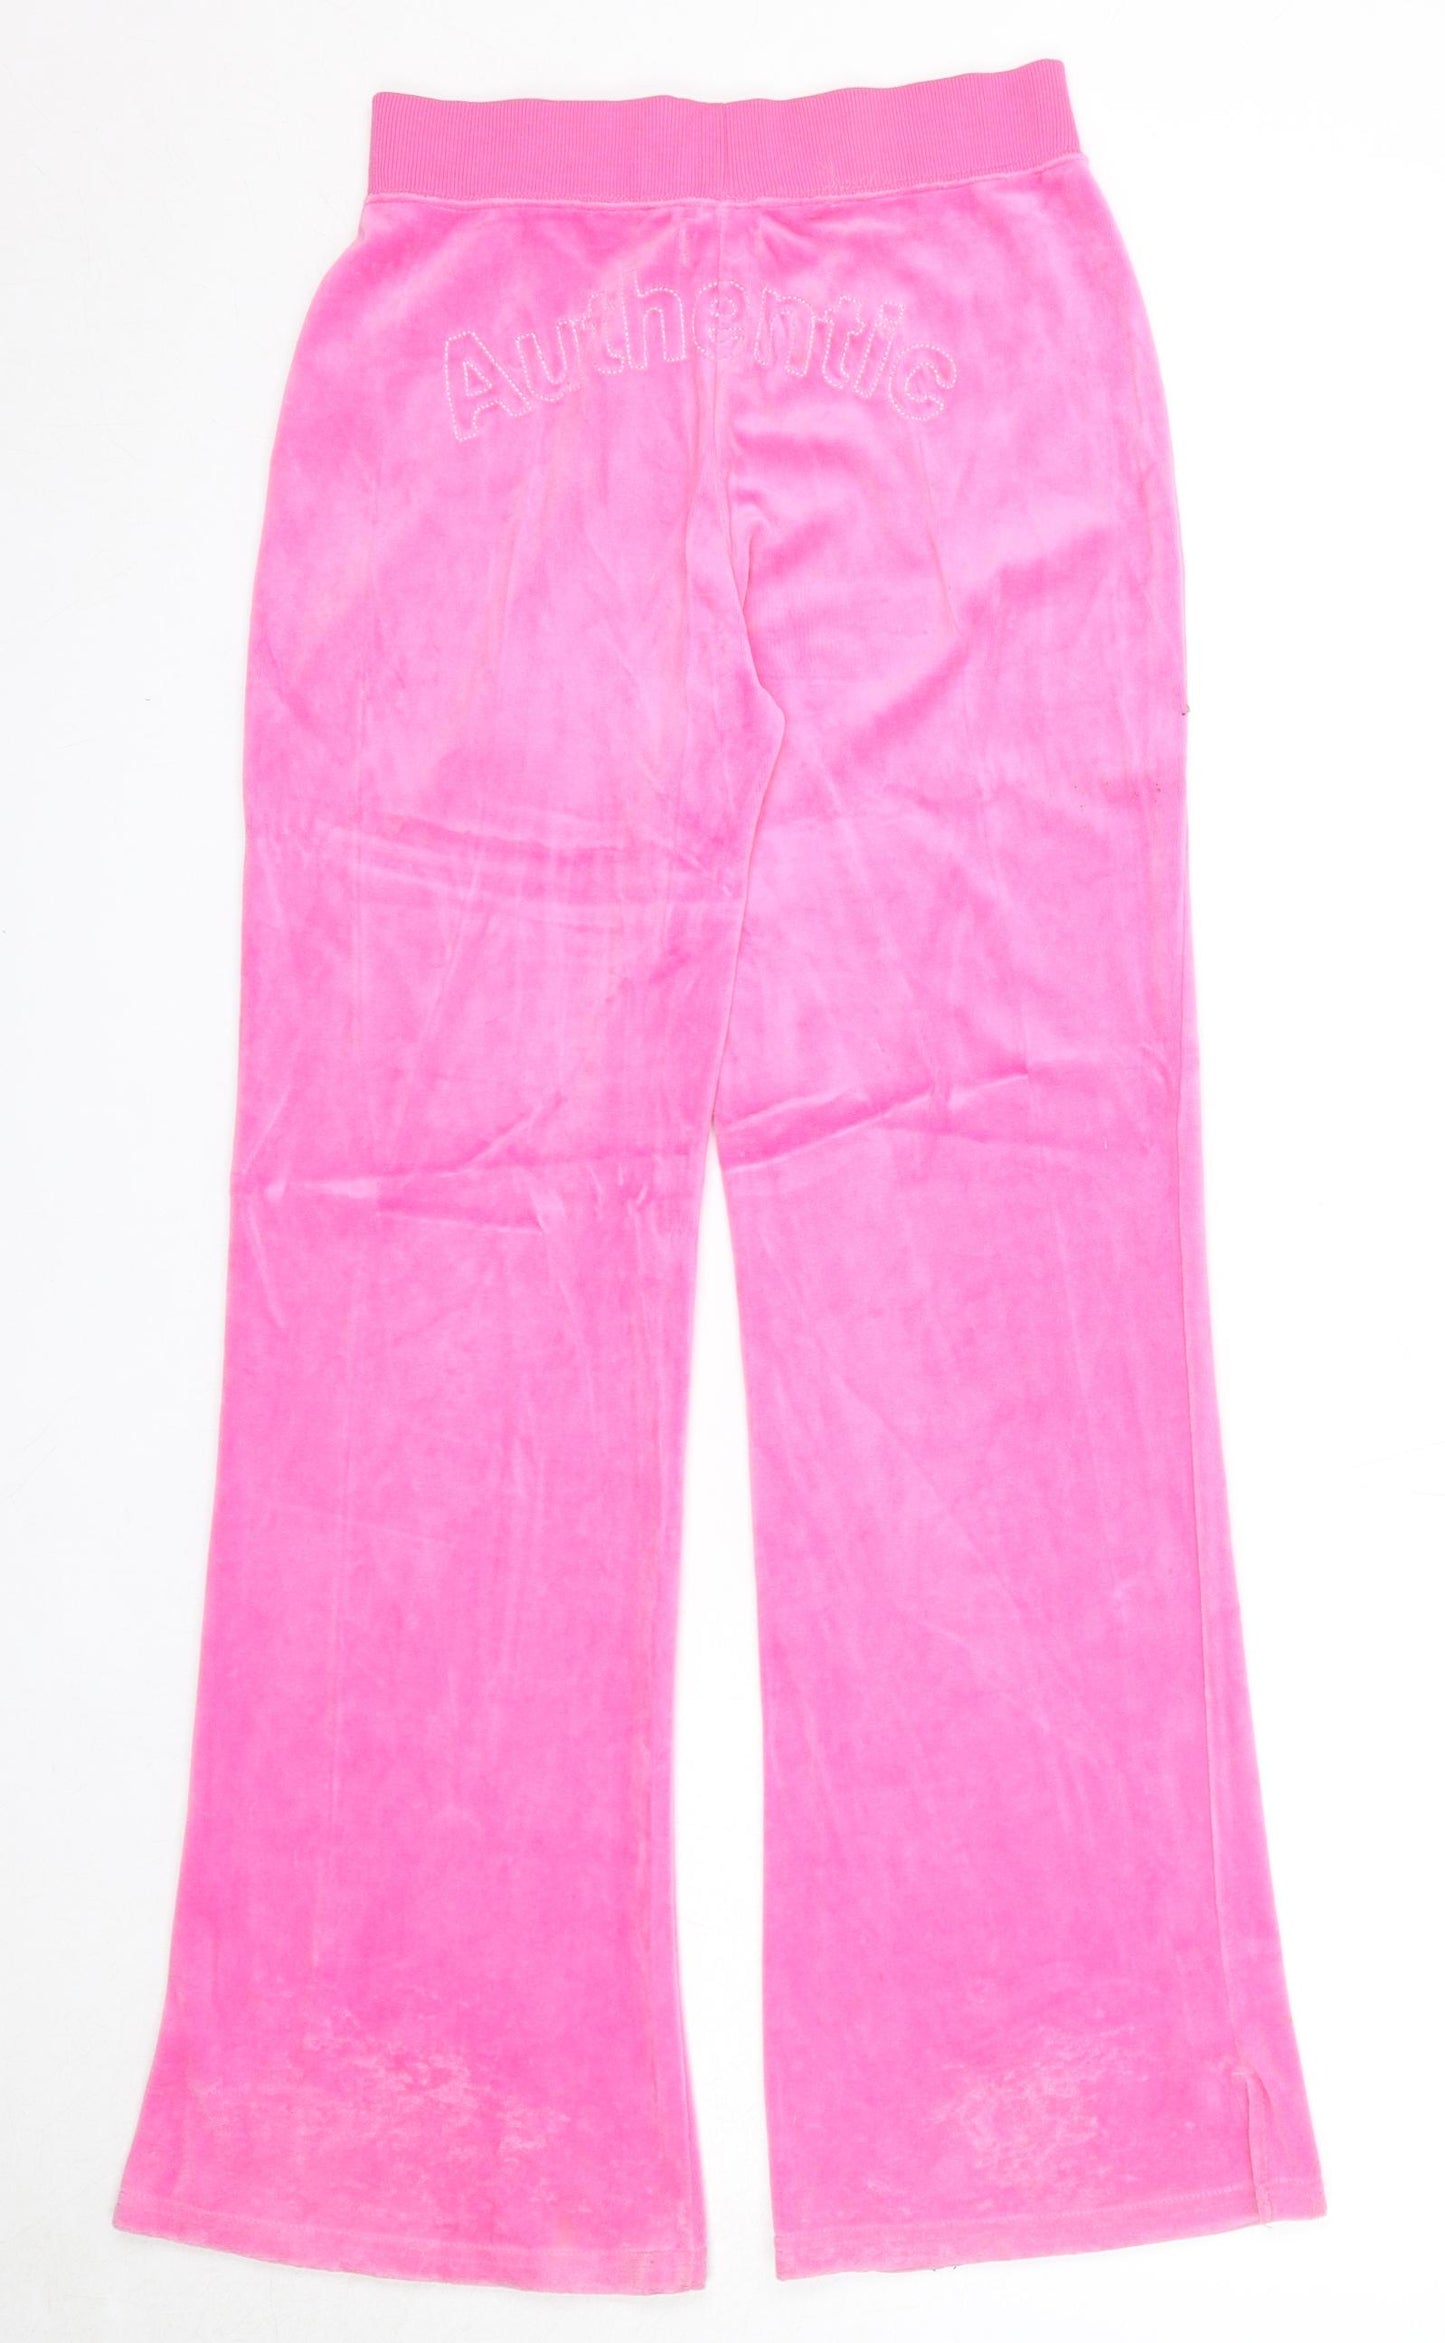 CQ Girls Pink Cotton Jogger Trousers Size 12-13 Years Regular Pullover